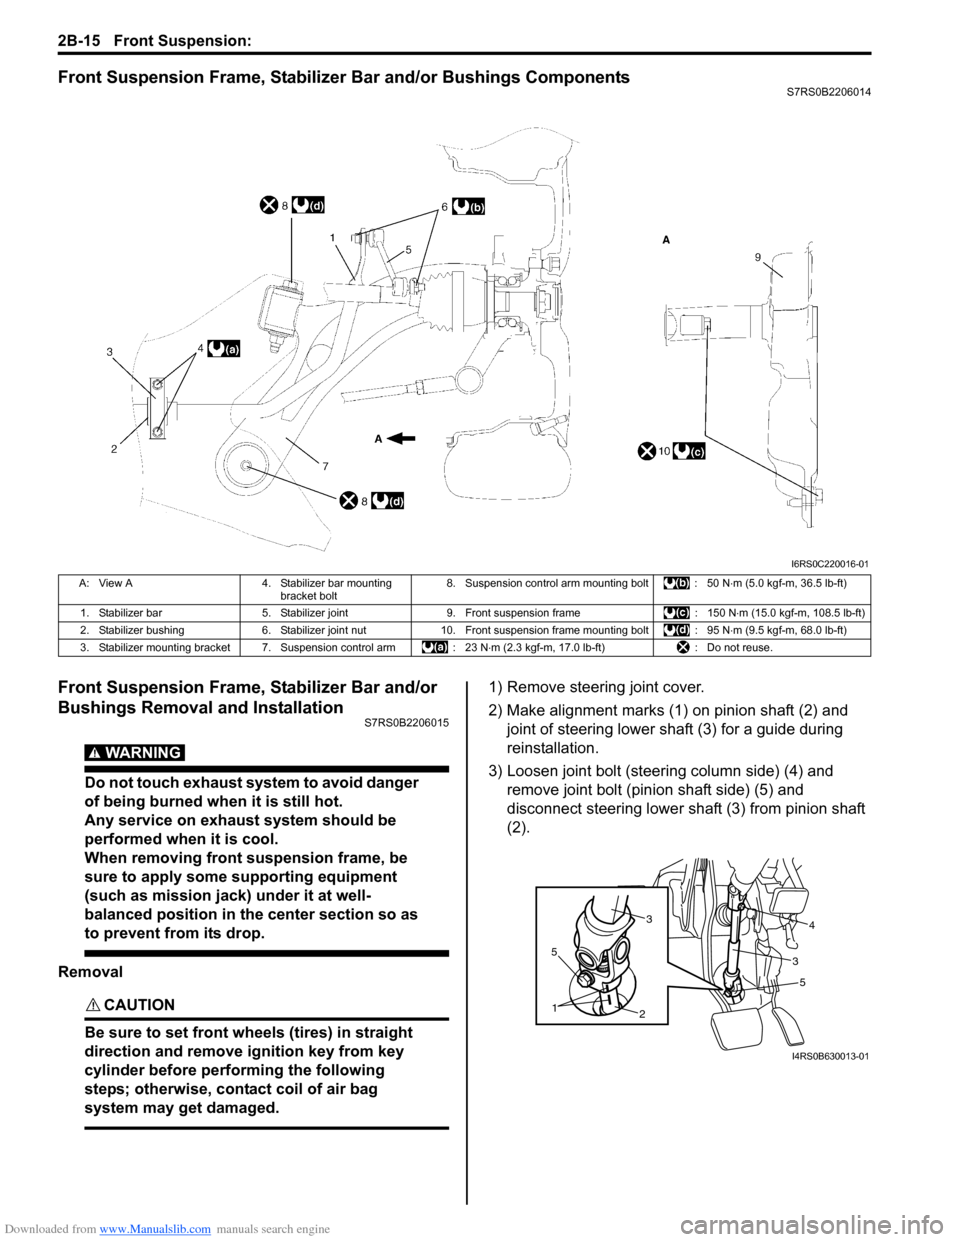 SUZUKI SWIFT 2008 2.G Service User Guide Downloaded from www.Manualslib.com manuals search engine 2B-15 Front Suspension: 
Front Suspension Frame, Stabilizer Bar and/or Bushings ComponentsS7RS0B2206014
Front Suspension Frame, Stabilizer Bar 